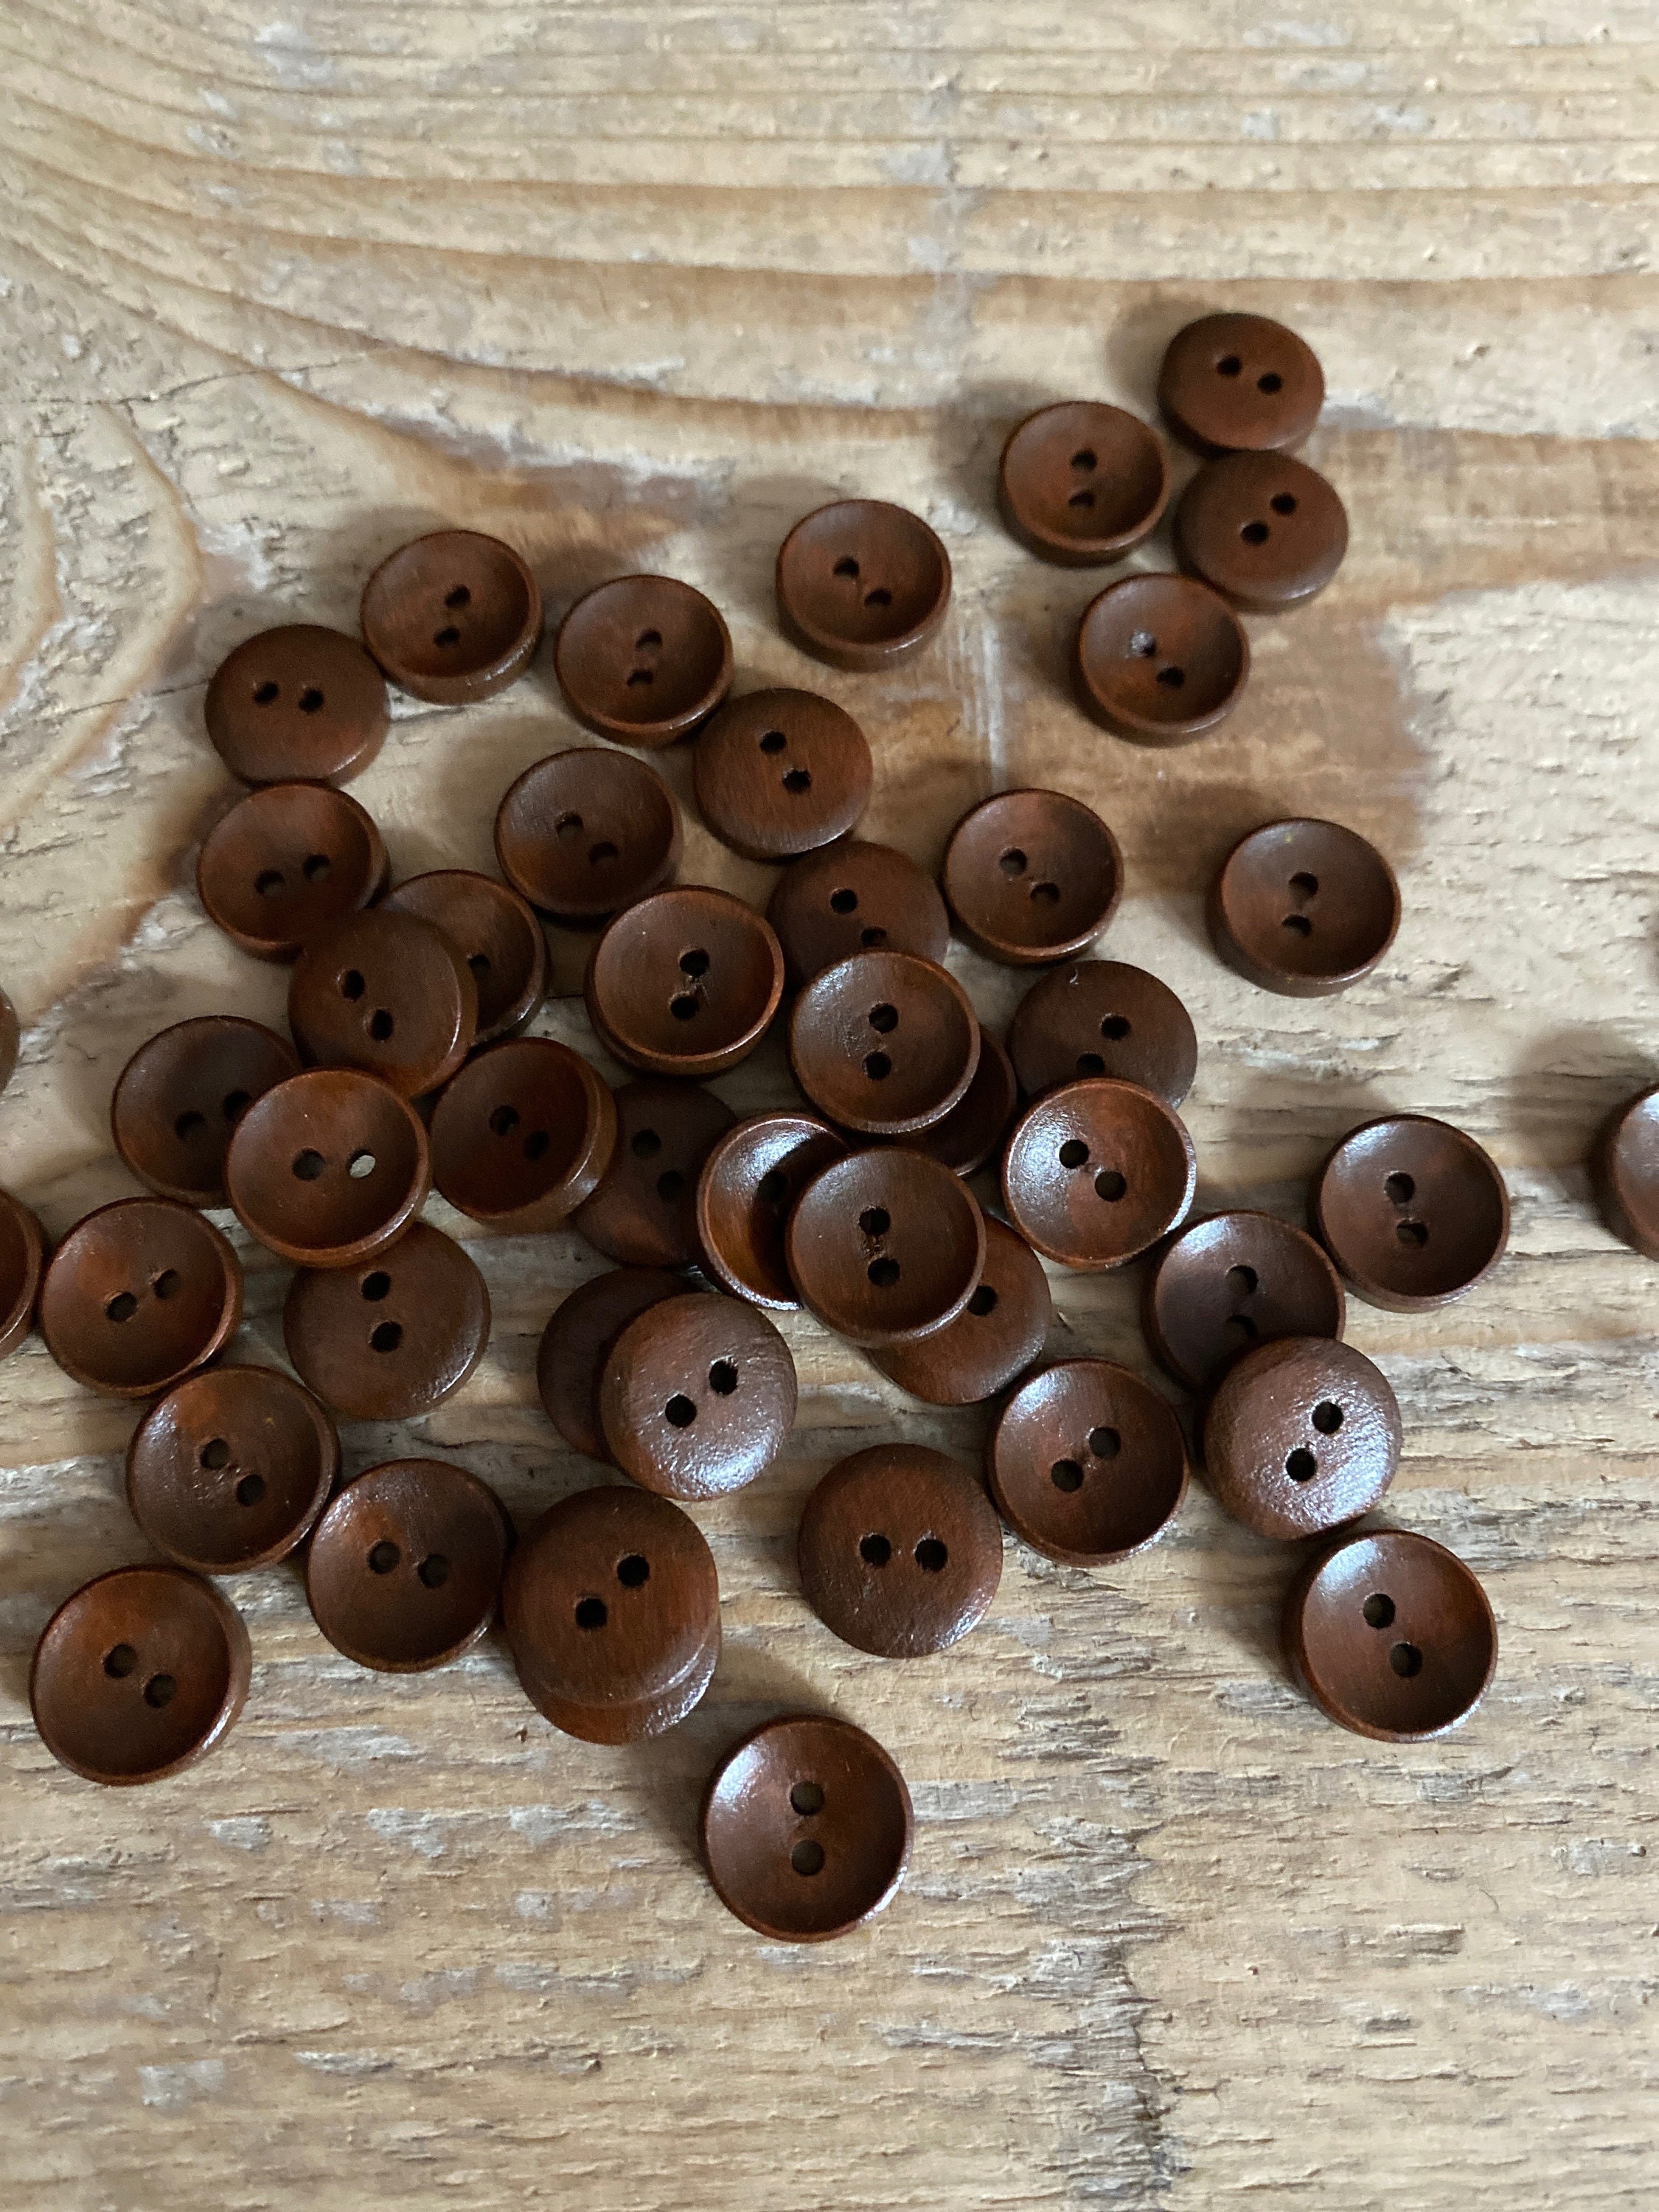 Dark Brown Buttons Dark Brown Suit Buttons Dark Brown Pant Buttons